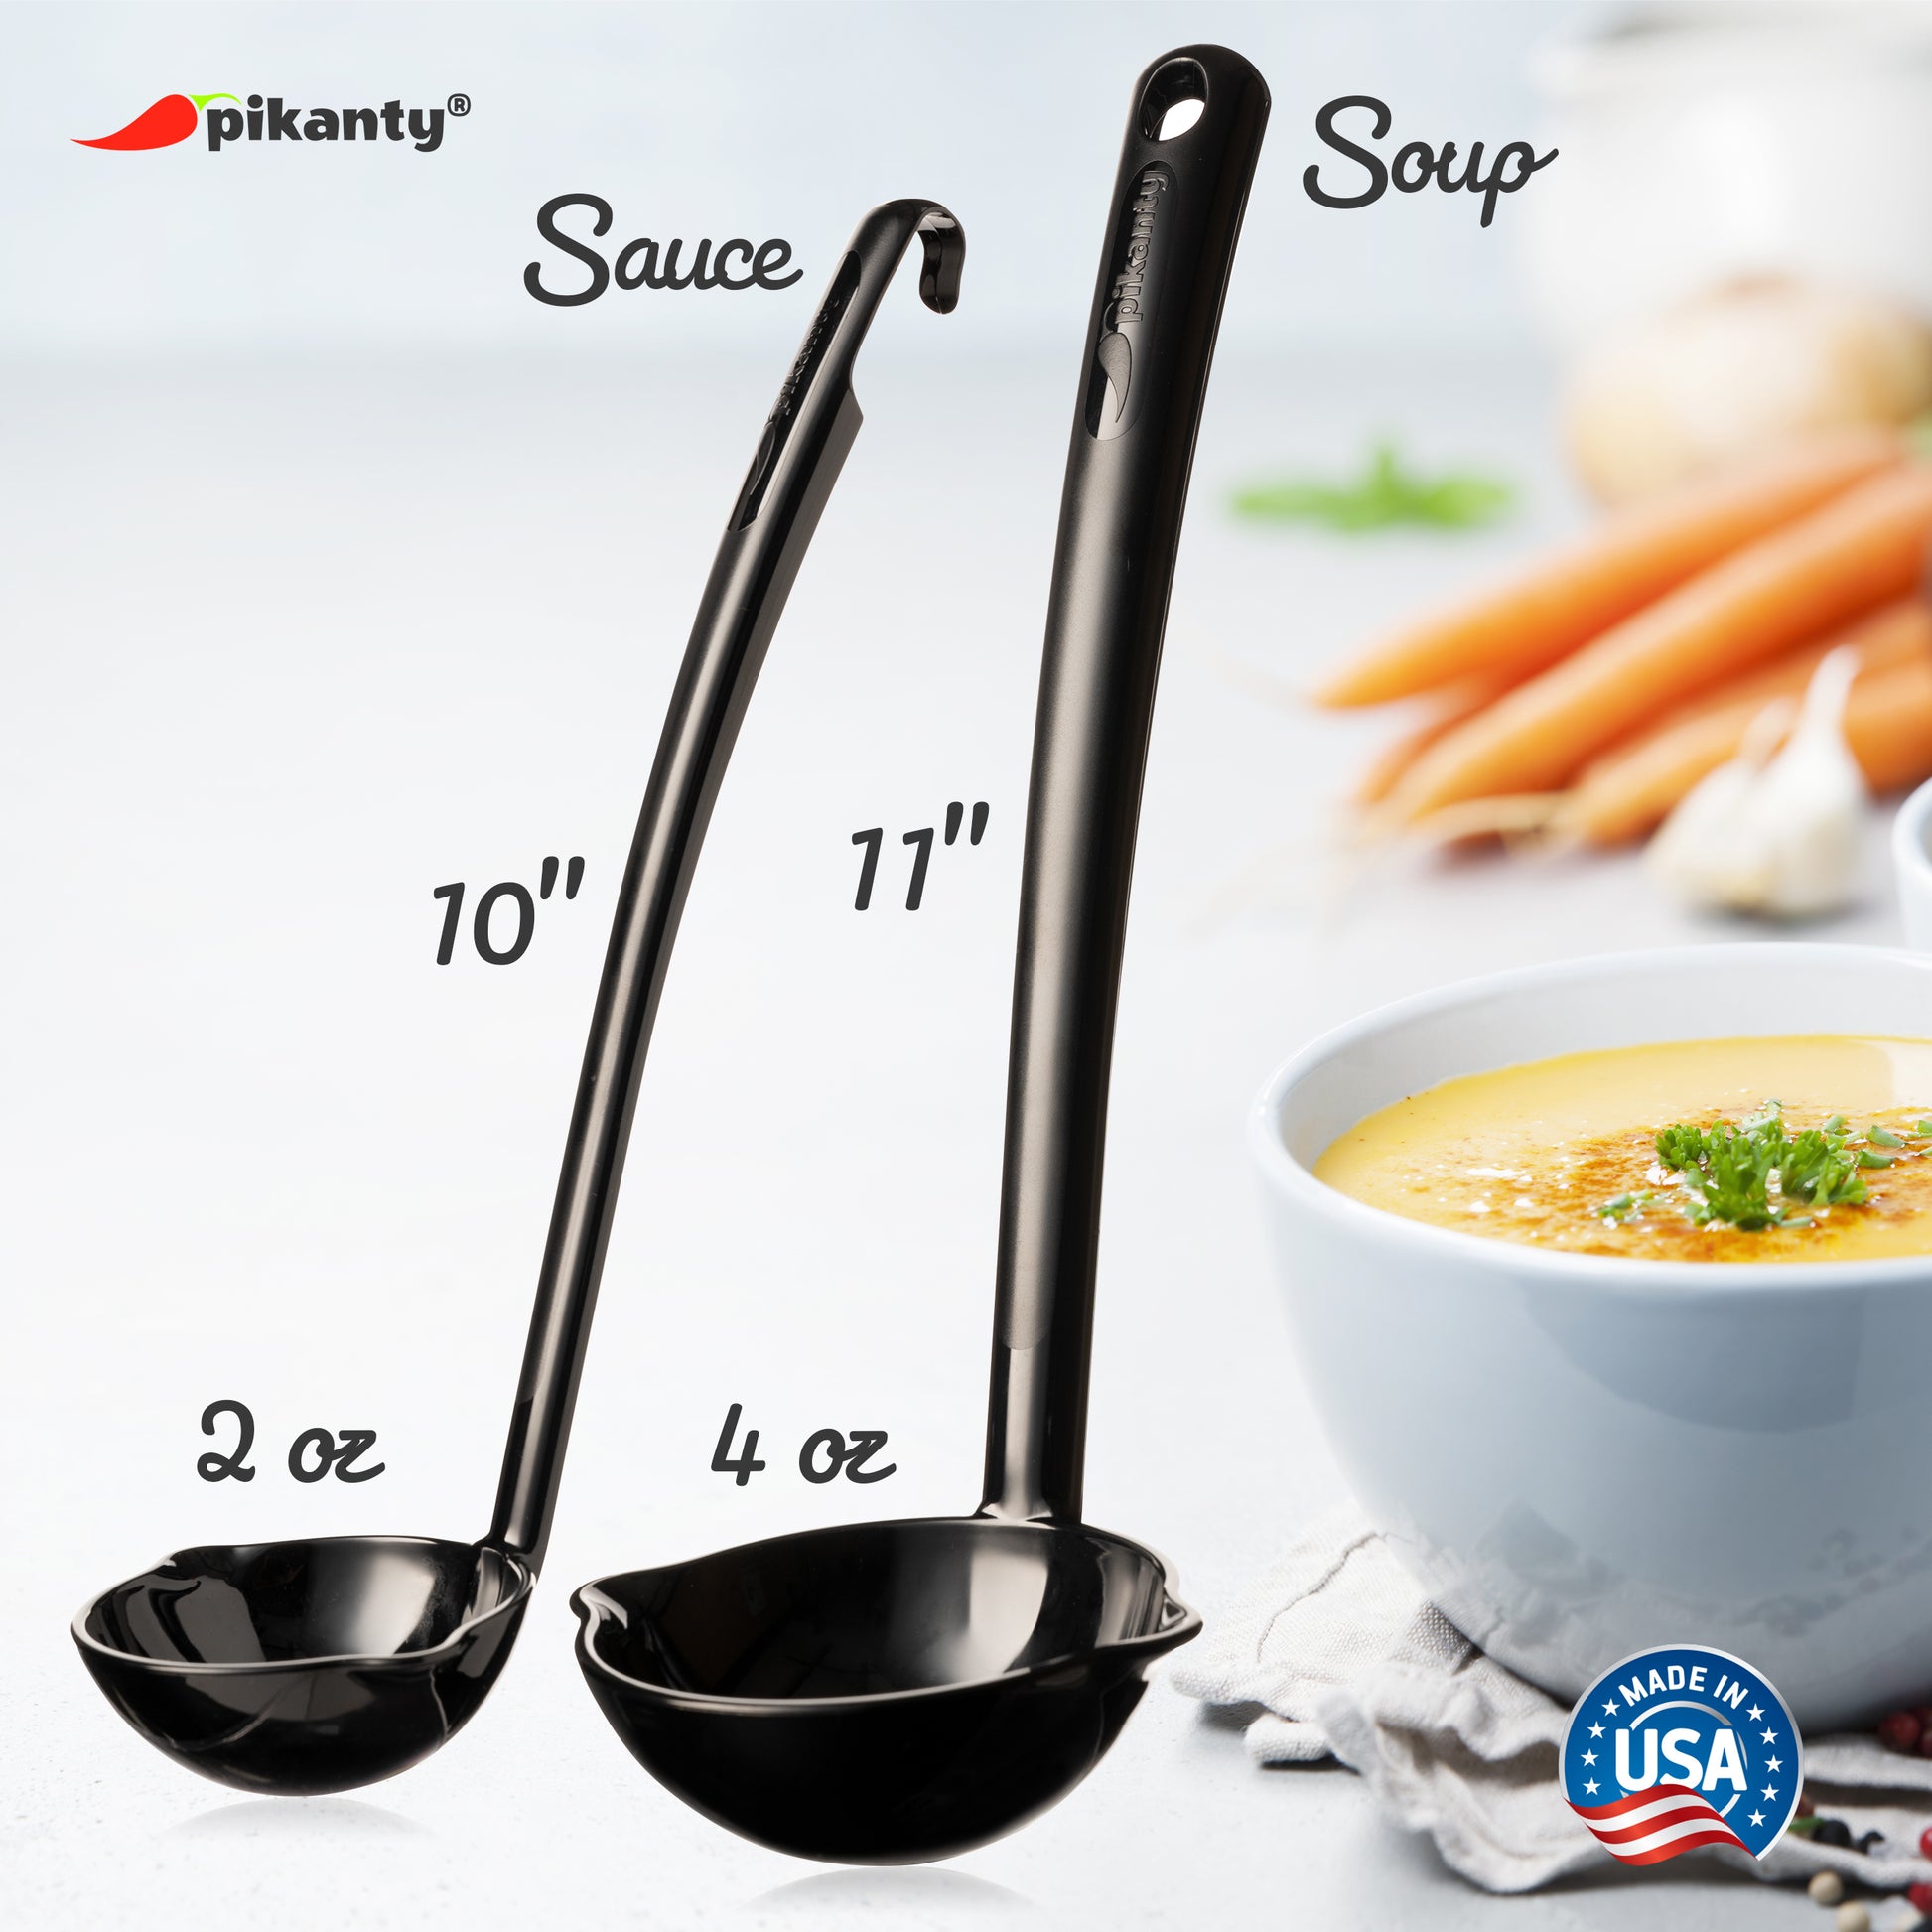 Pikanty - Ladle Soup and Sauce Set of 2 Made in USA (Black)